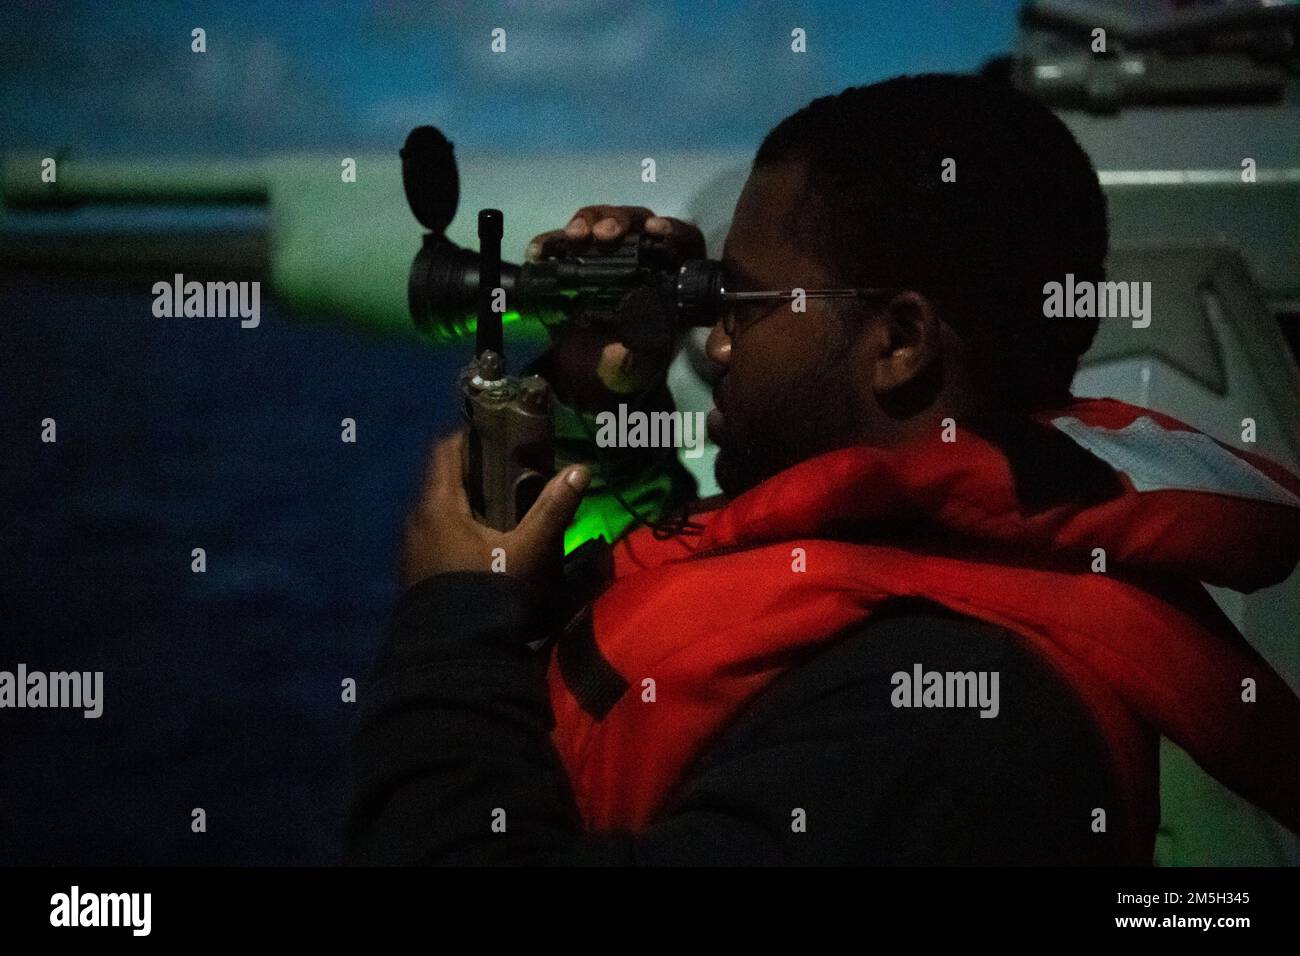 PHILIPPINE SEA (March 17, 2022) Gunner’s Mate 2nd Class Taquan Taylor, from Mobile, Alabama, mans the Mark 38 – 25 mm machine gun aboard the Arleigh Burke-class guided-missile destroyer USS Dewey (DDG 105) while conducting routine operations underway in the U.S. 7th Fleet area of responsibility. Dewey is assigned to Destroyer Squadron (DESRON) 15 and is underway supporting a free and open Indo-Pacific. CTF 71/DESRON 15 is the Navy’s largest forward-deployed DESRON and the U.S. 7th Fleet’s principal surface force. Stock Photo